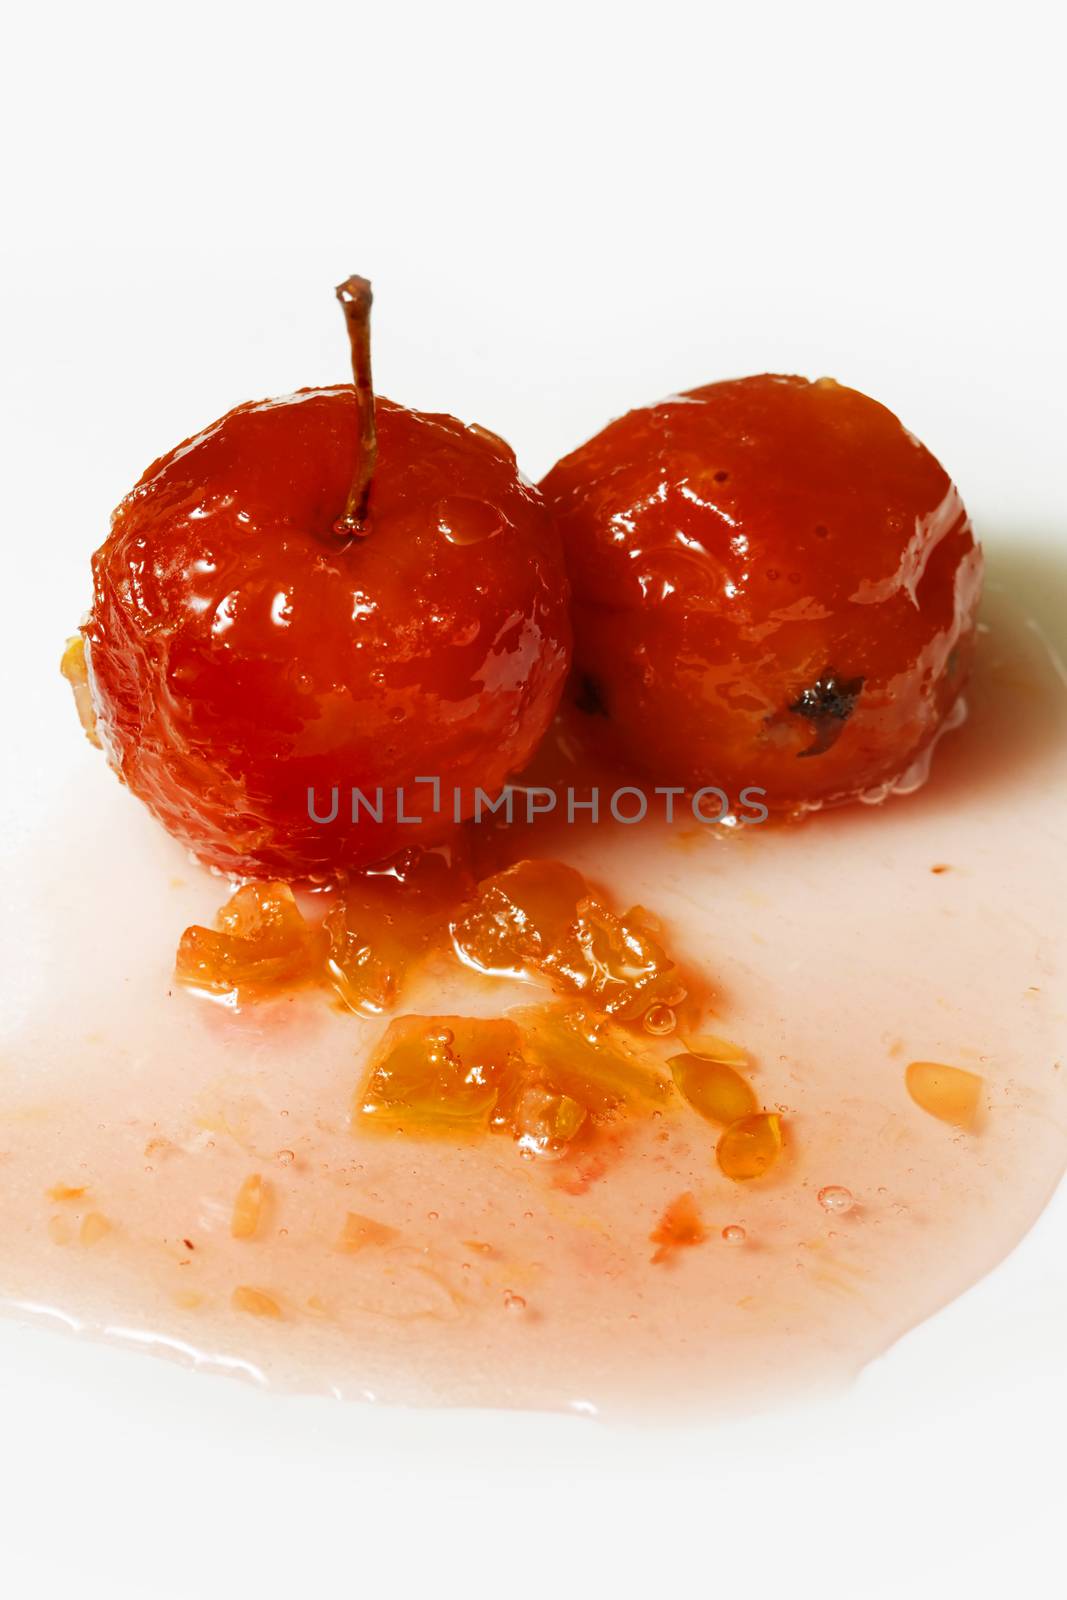 Red apples in rose syrup with small pieces of zucchini over isolated white background